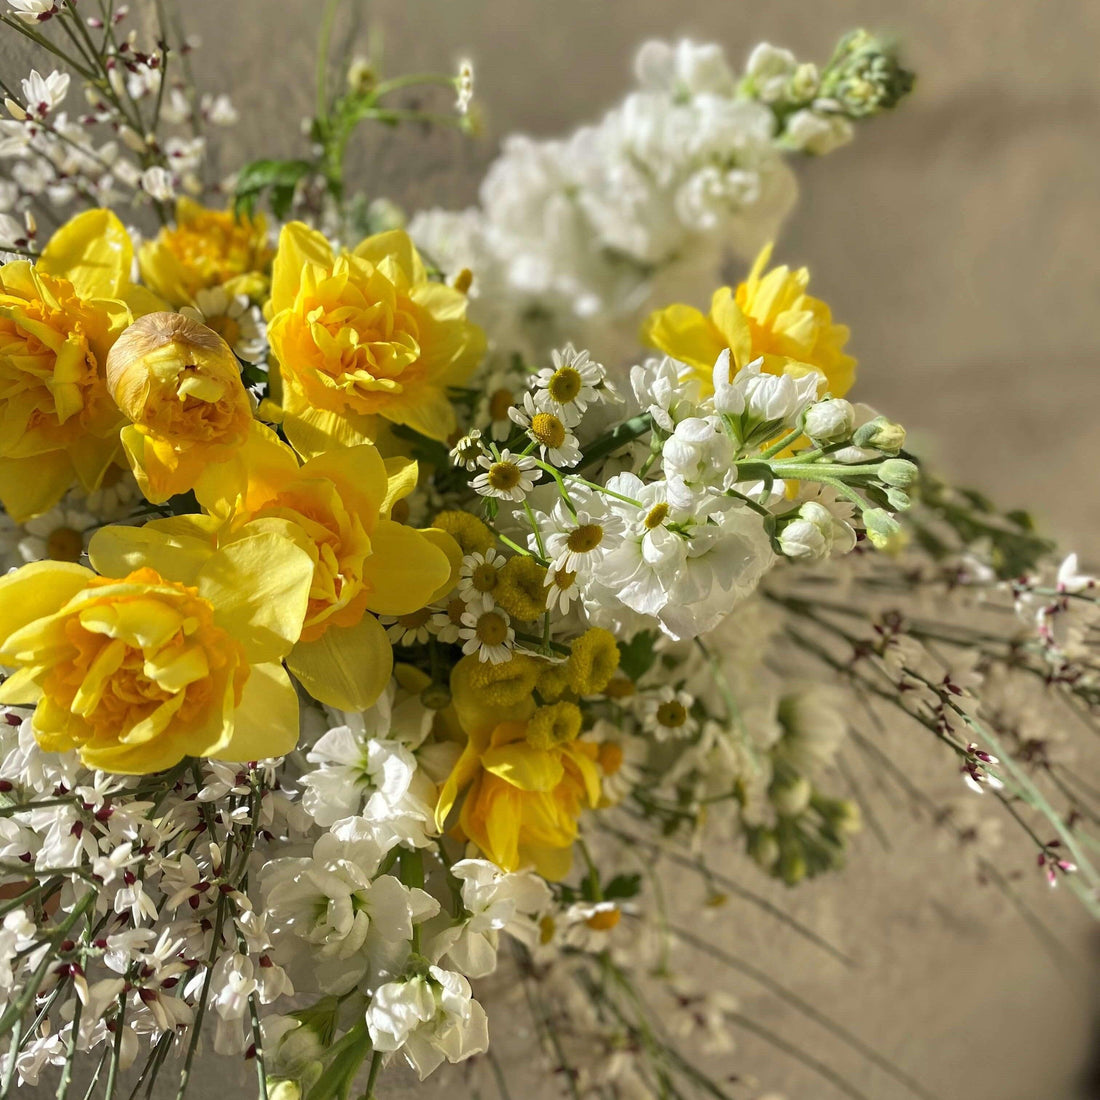 Our guide to spring flowers: Daffodils - by Cabane - sustainable floral design studio in California